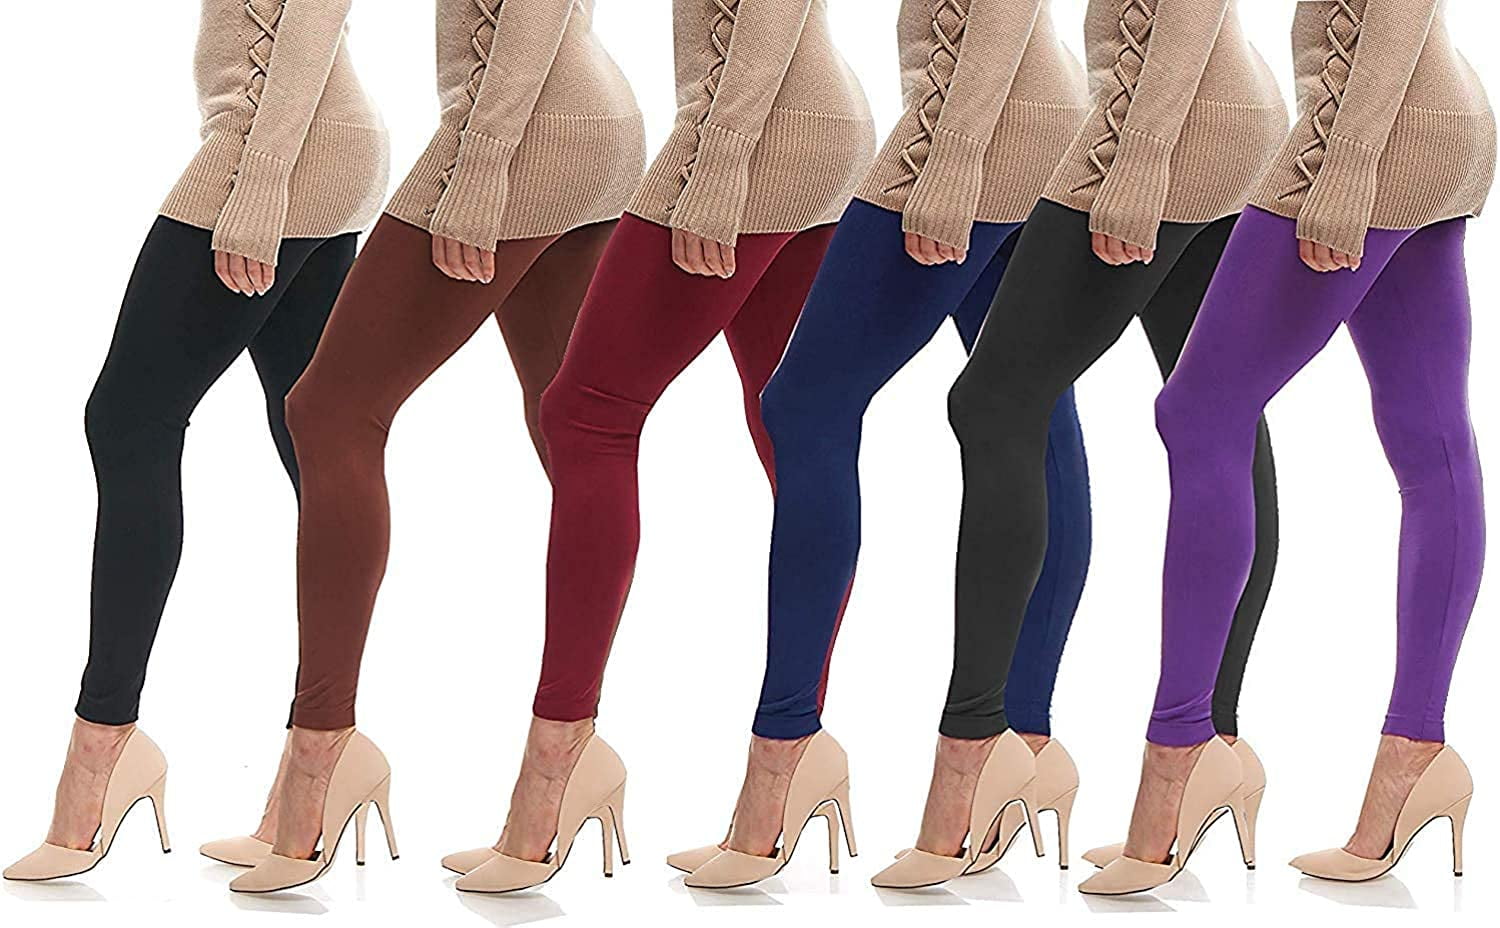 LMB Lush Moda Full Length Footless Tights Leggings for Women, Variety of Colors, One Size fits Most (XS -XL) - Six Pack